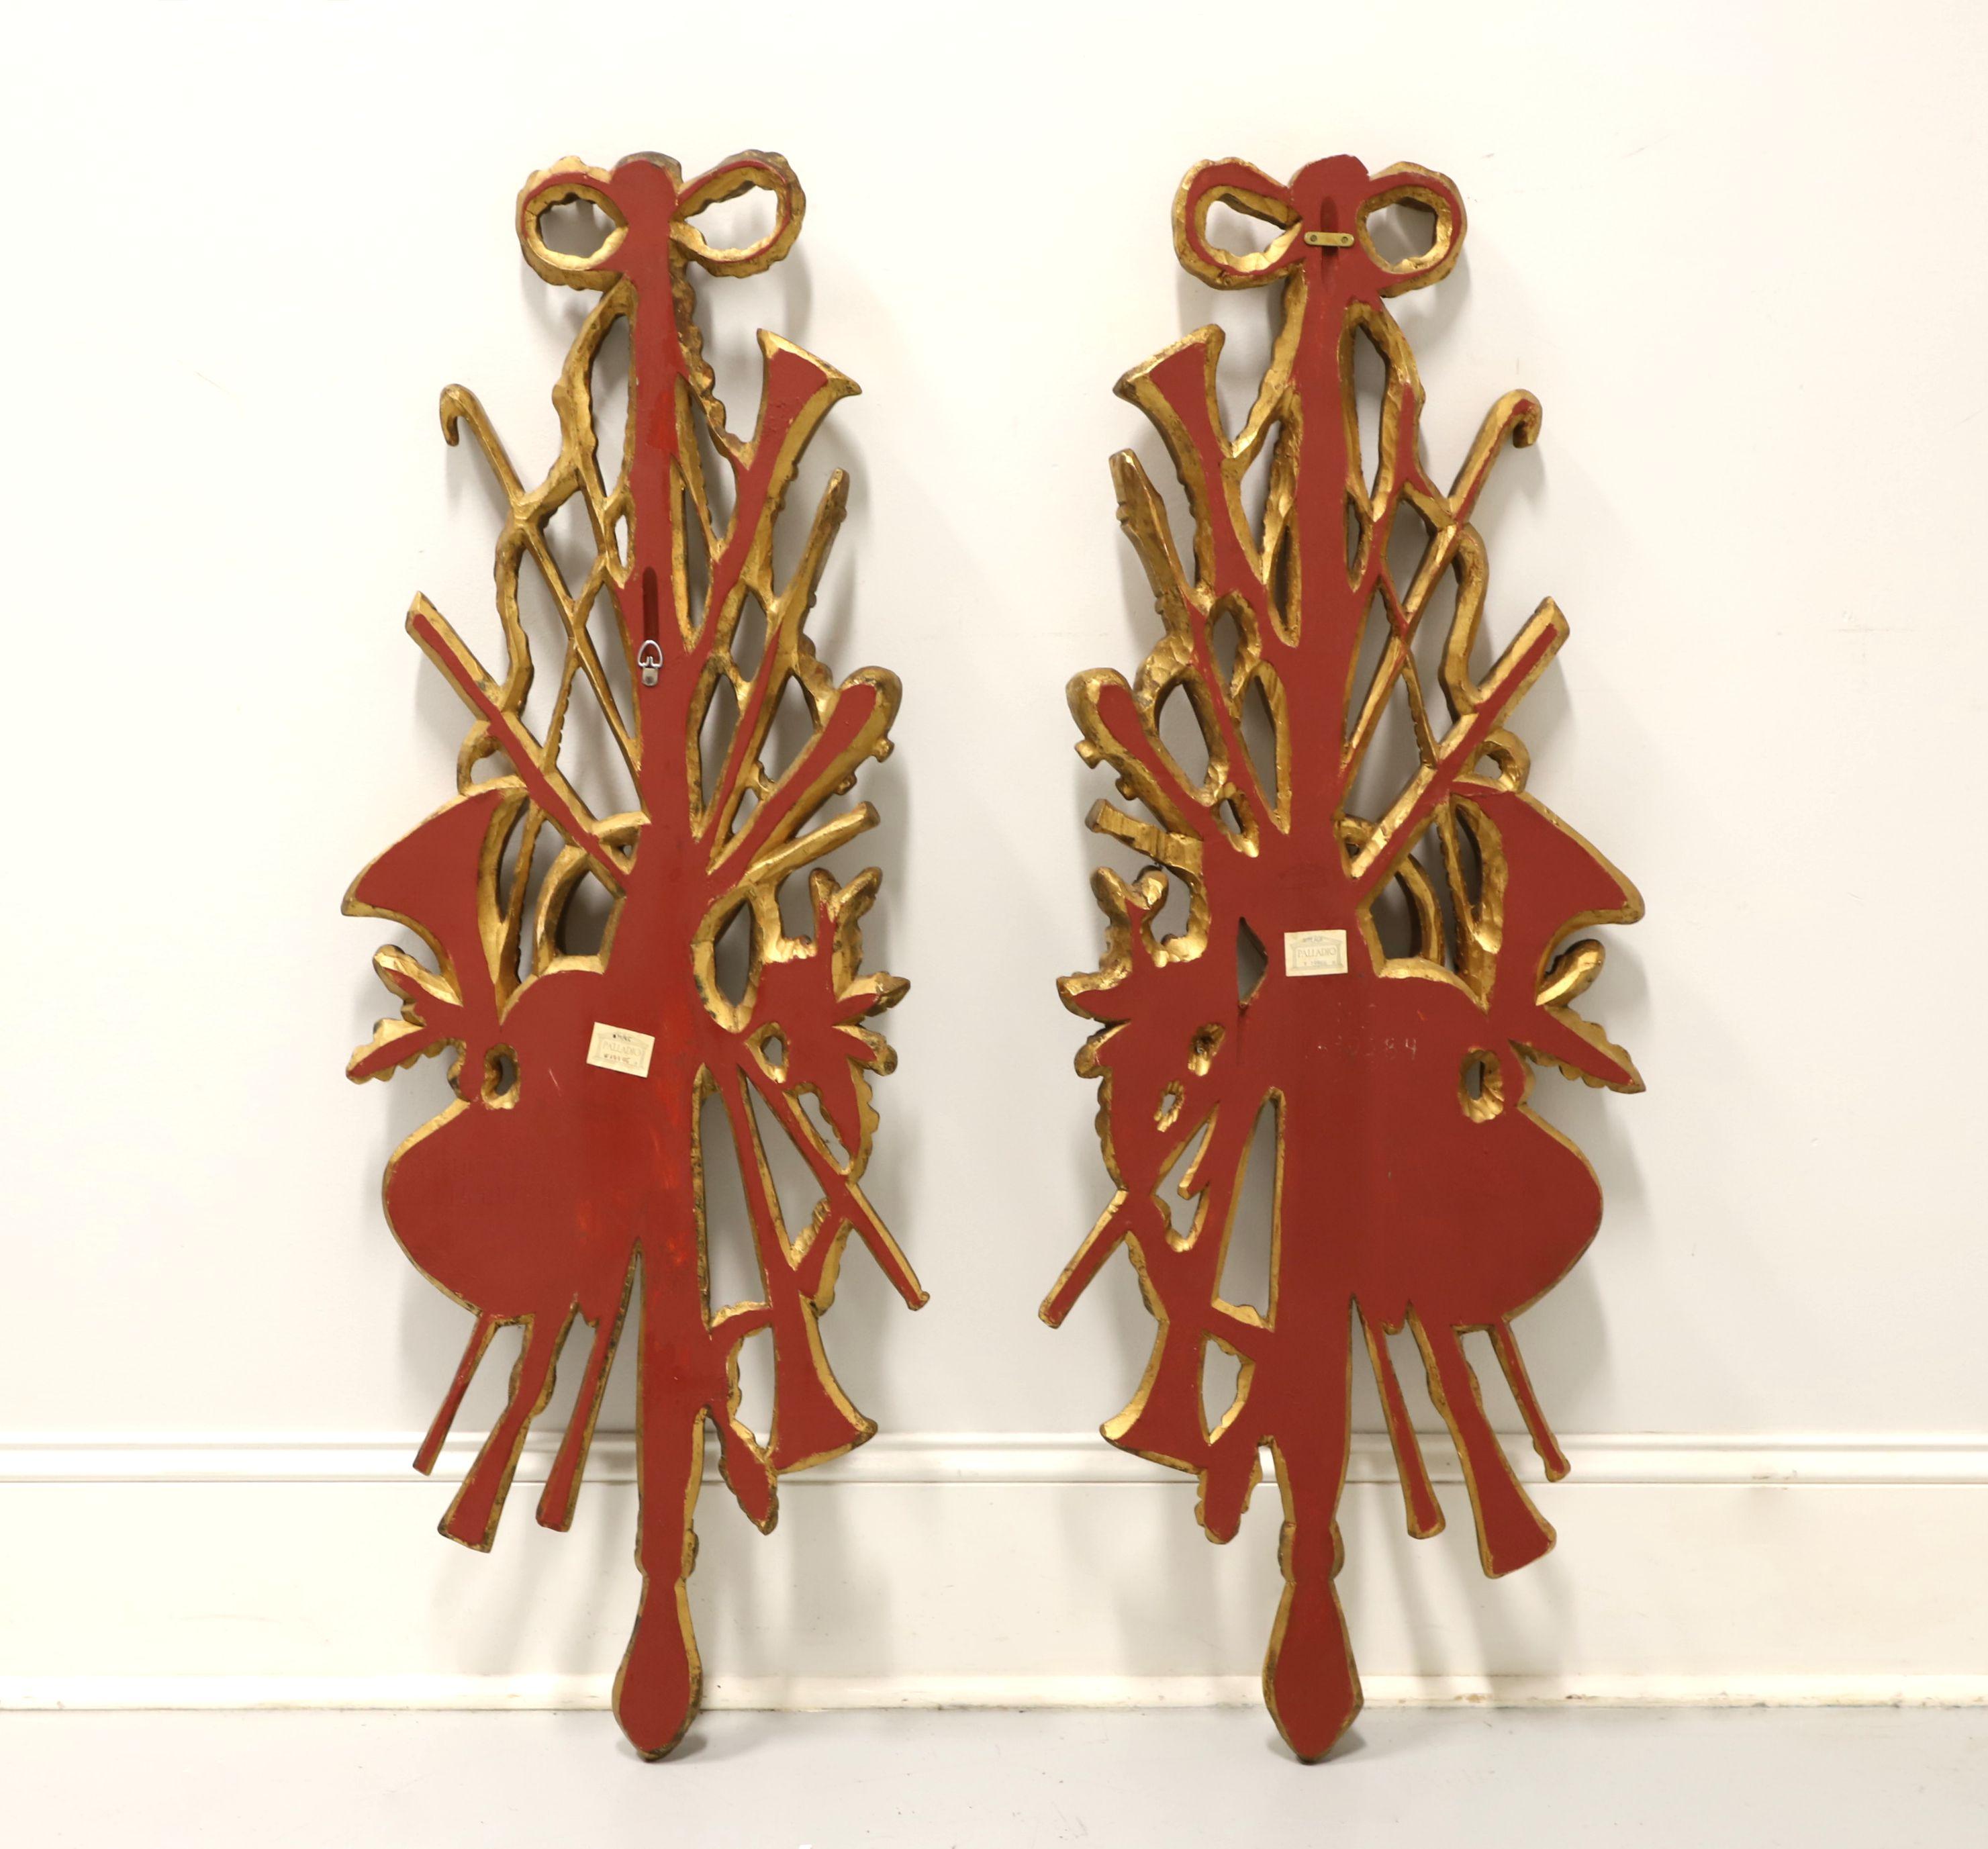 PALLADIO 1960's Carved Wood Musical Instrument Wall Sculpture - Pair For Sale 2